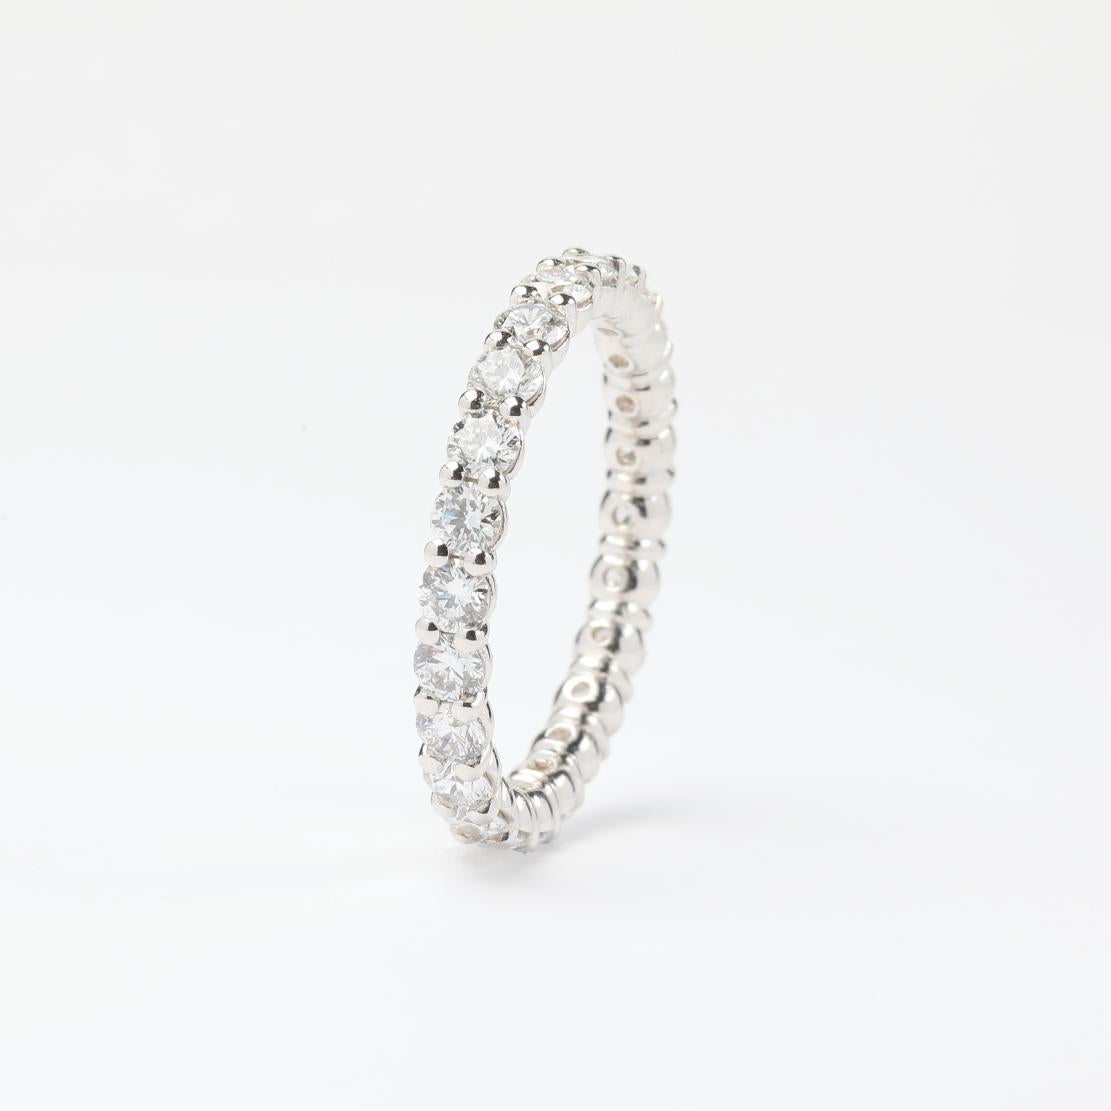 Classic Cushion Shaped Eternity Band Ring, featuring:
✧ Shared prong set natural diamonds weighing approx. 2.10 tcw  (Very Good Cut F-G color, VS1-VS2 clarity)
✧ Number of Set Diamonds: 24
✧ Band width: ~2mm thick 
✧ Approximately 2.65 grams of 18K